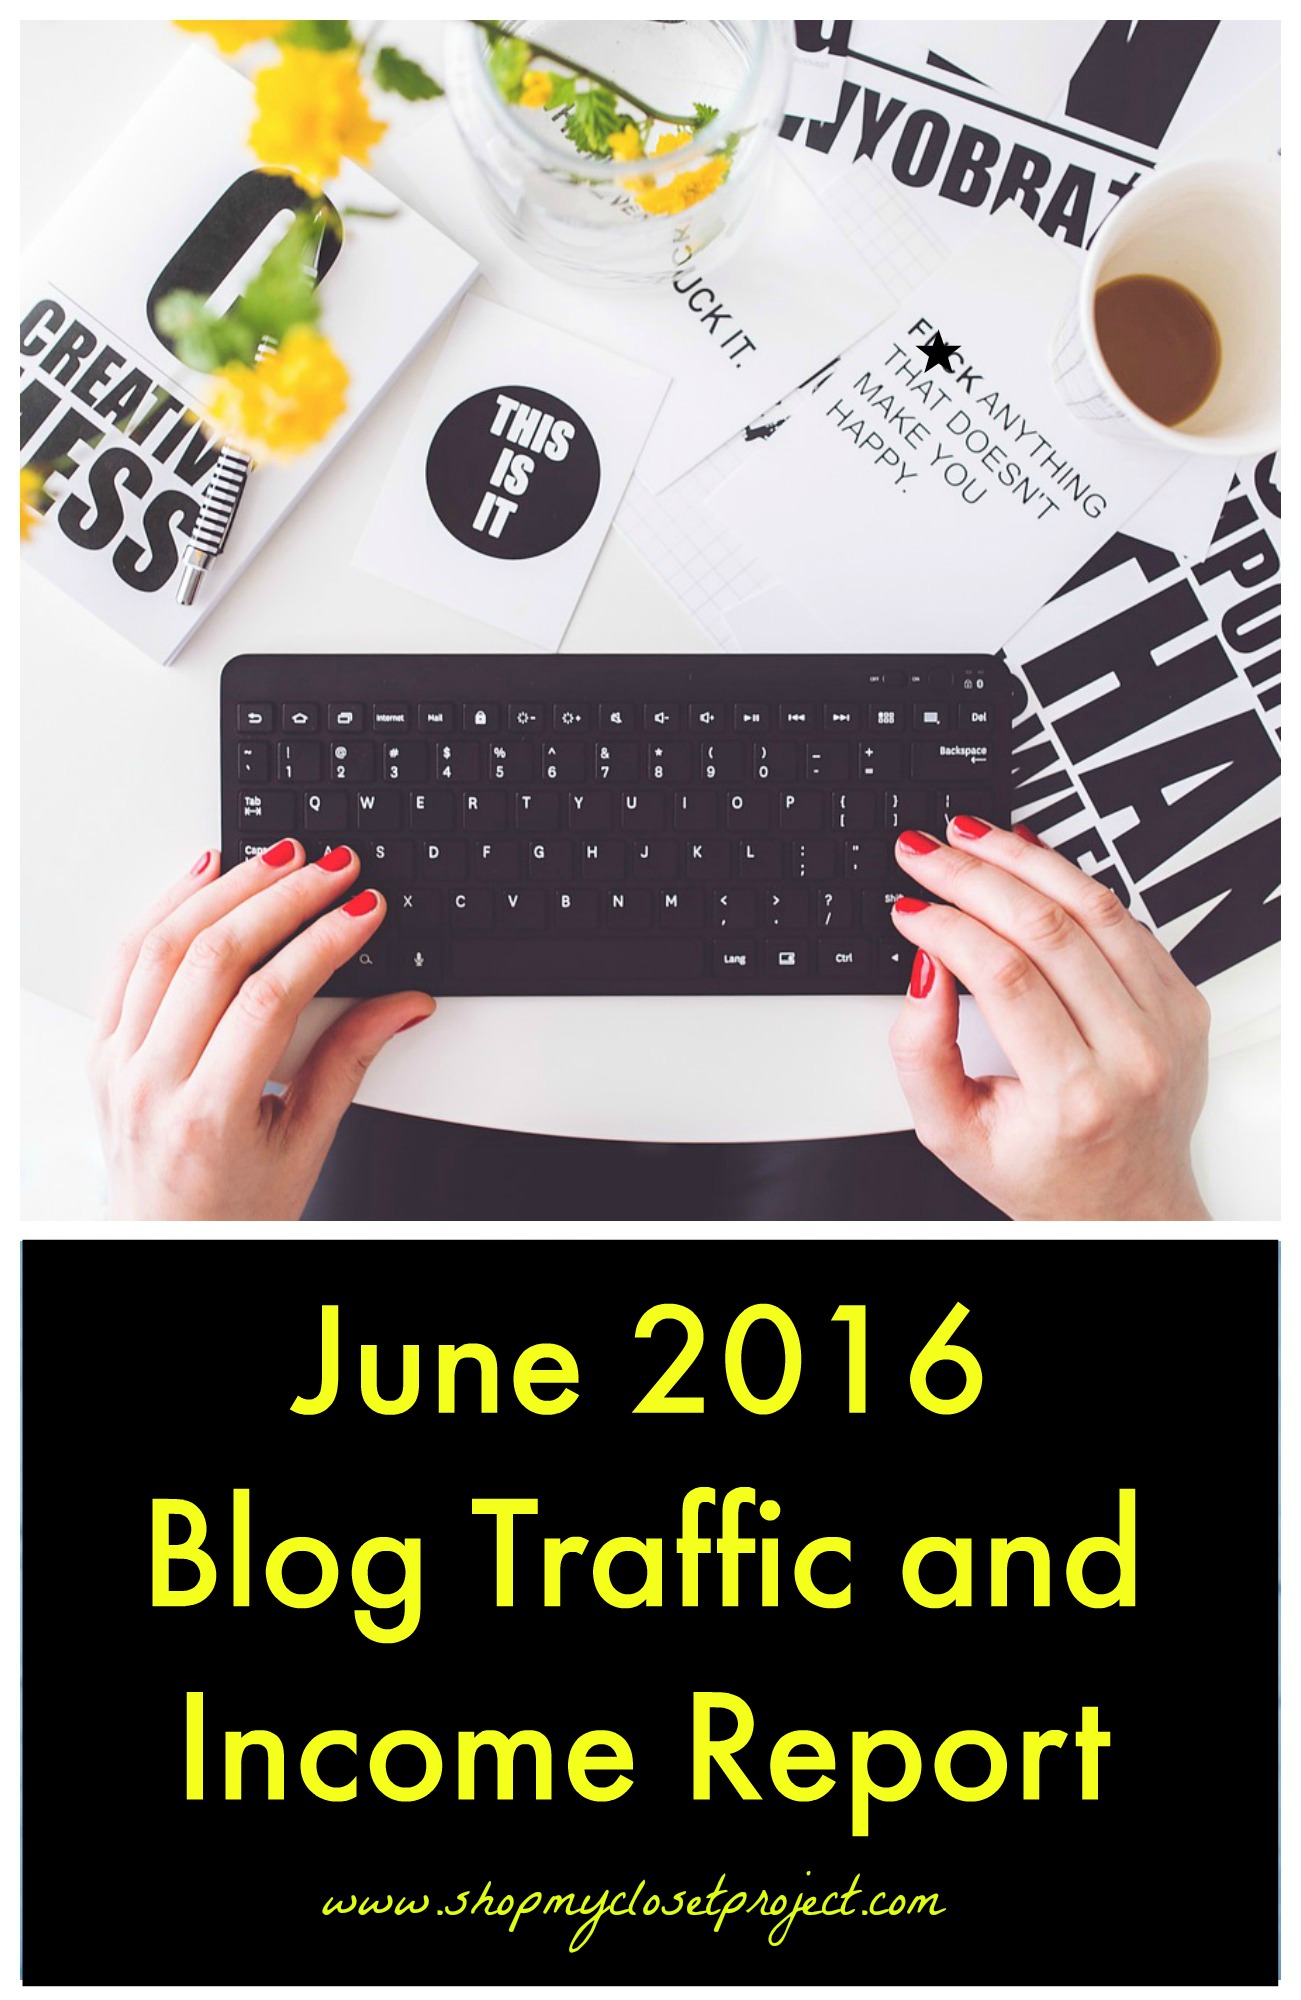 Blog Traffic and Income Report June 2016